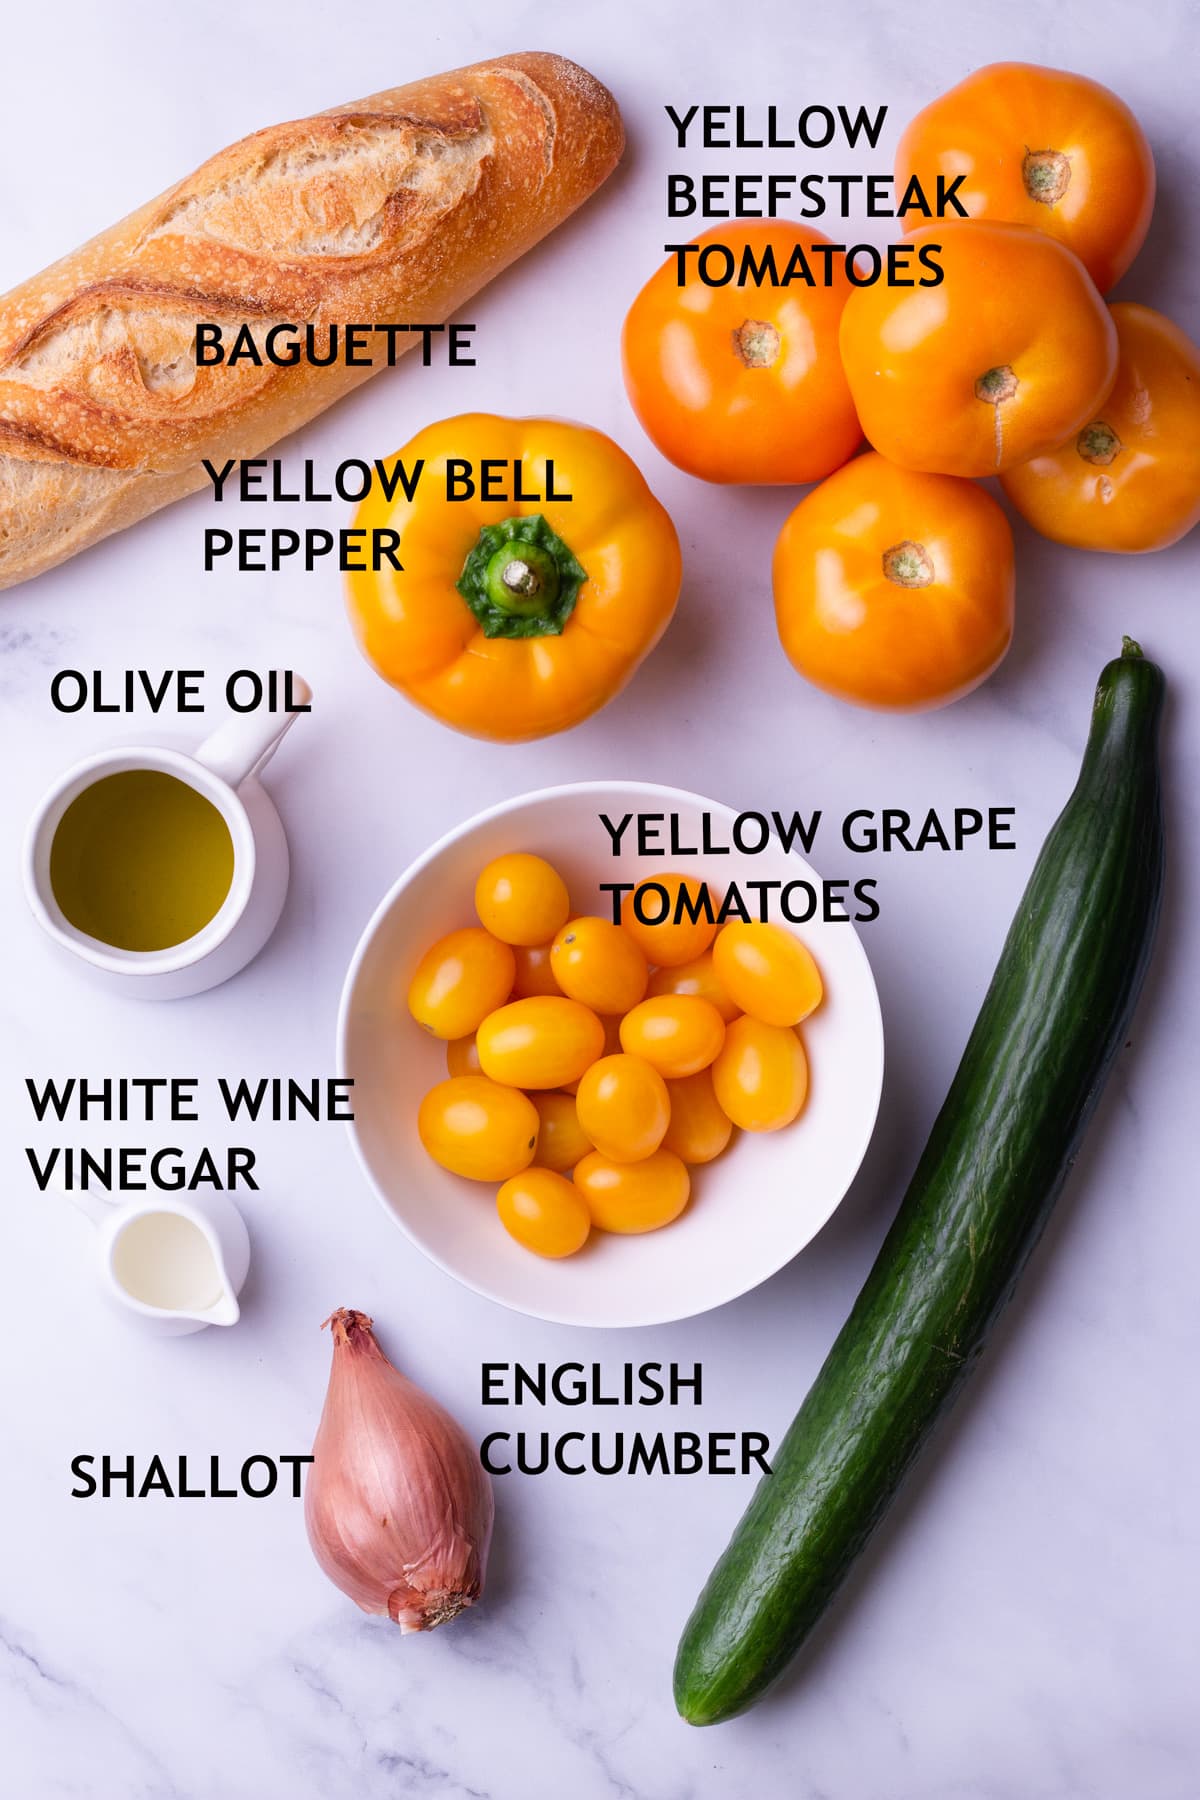 Overhead view of ingredients for gazpacho including bread, yellow tomatoes, a yellow bell pepper, an English cucumber, a shallot, olive oil, and white wine vinegar.